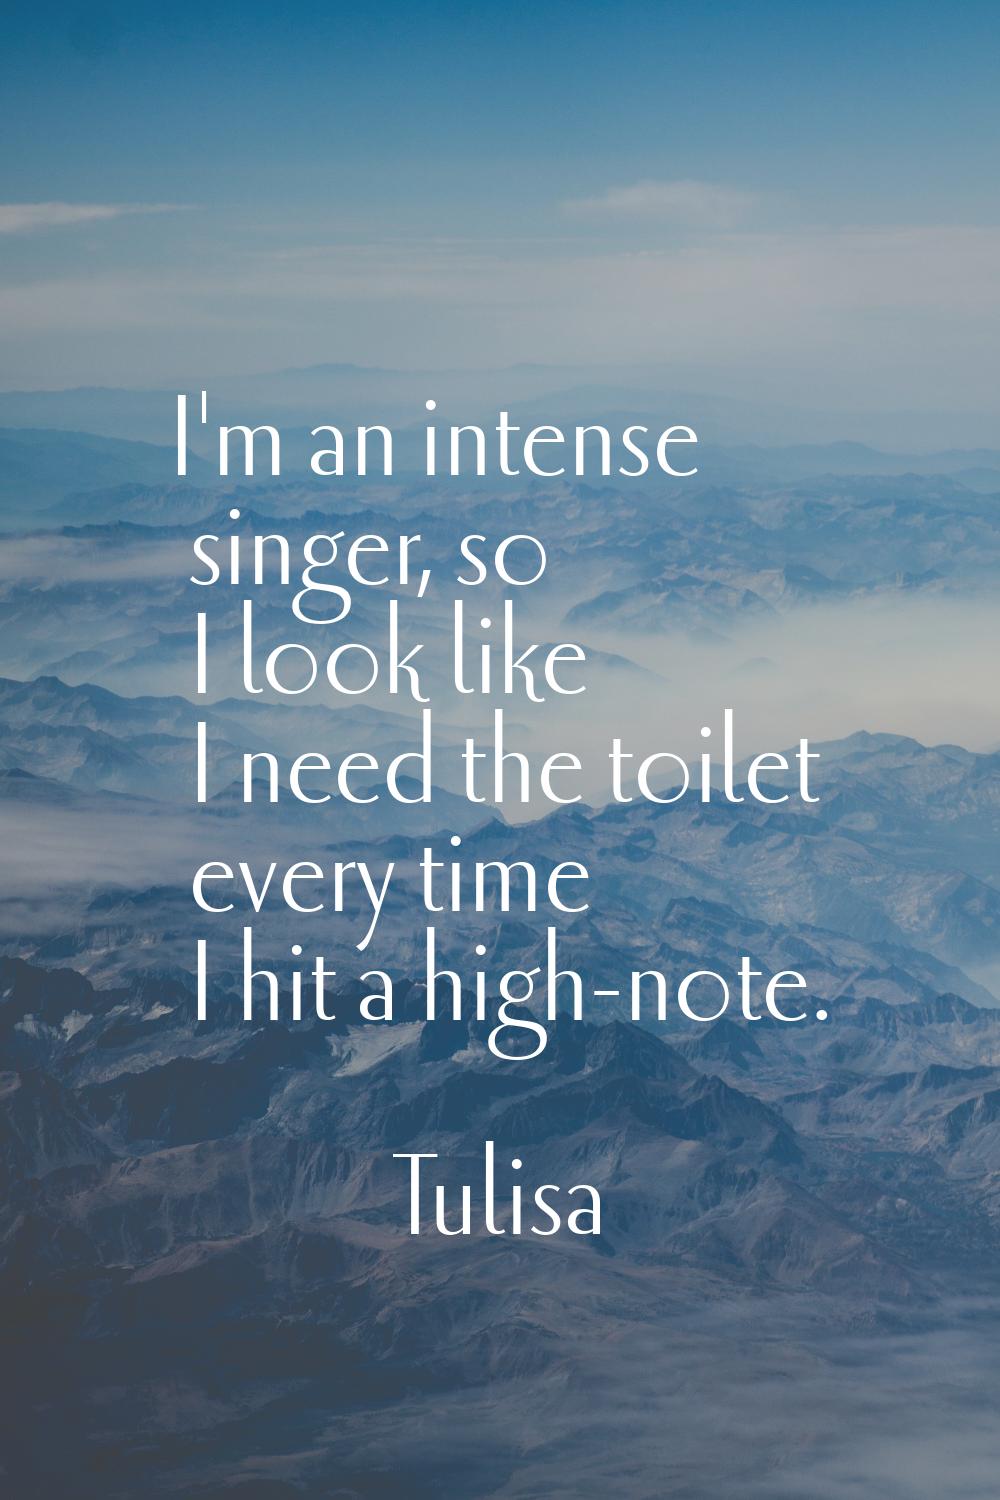 I'm an intense singer, so I look like I need the toilet every time I hit a high-note.